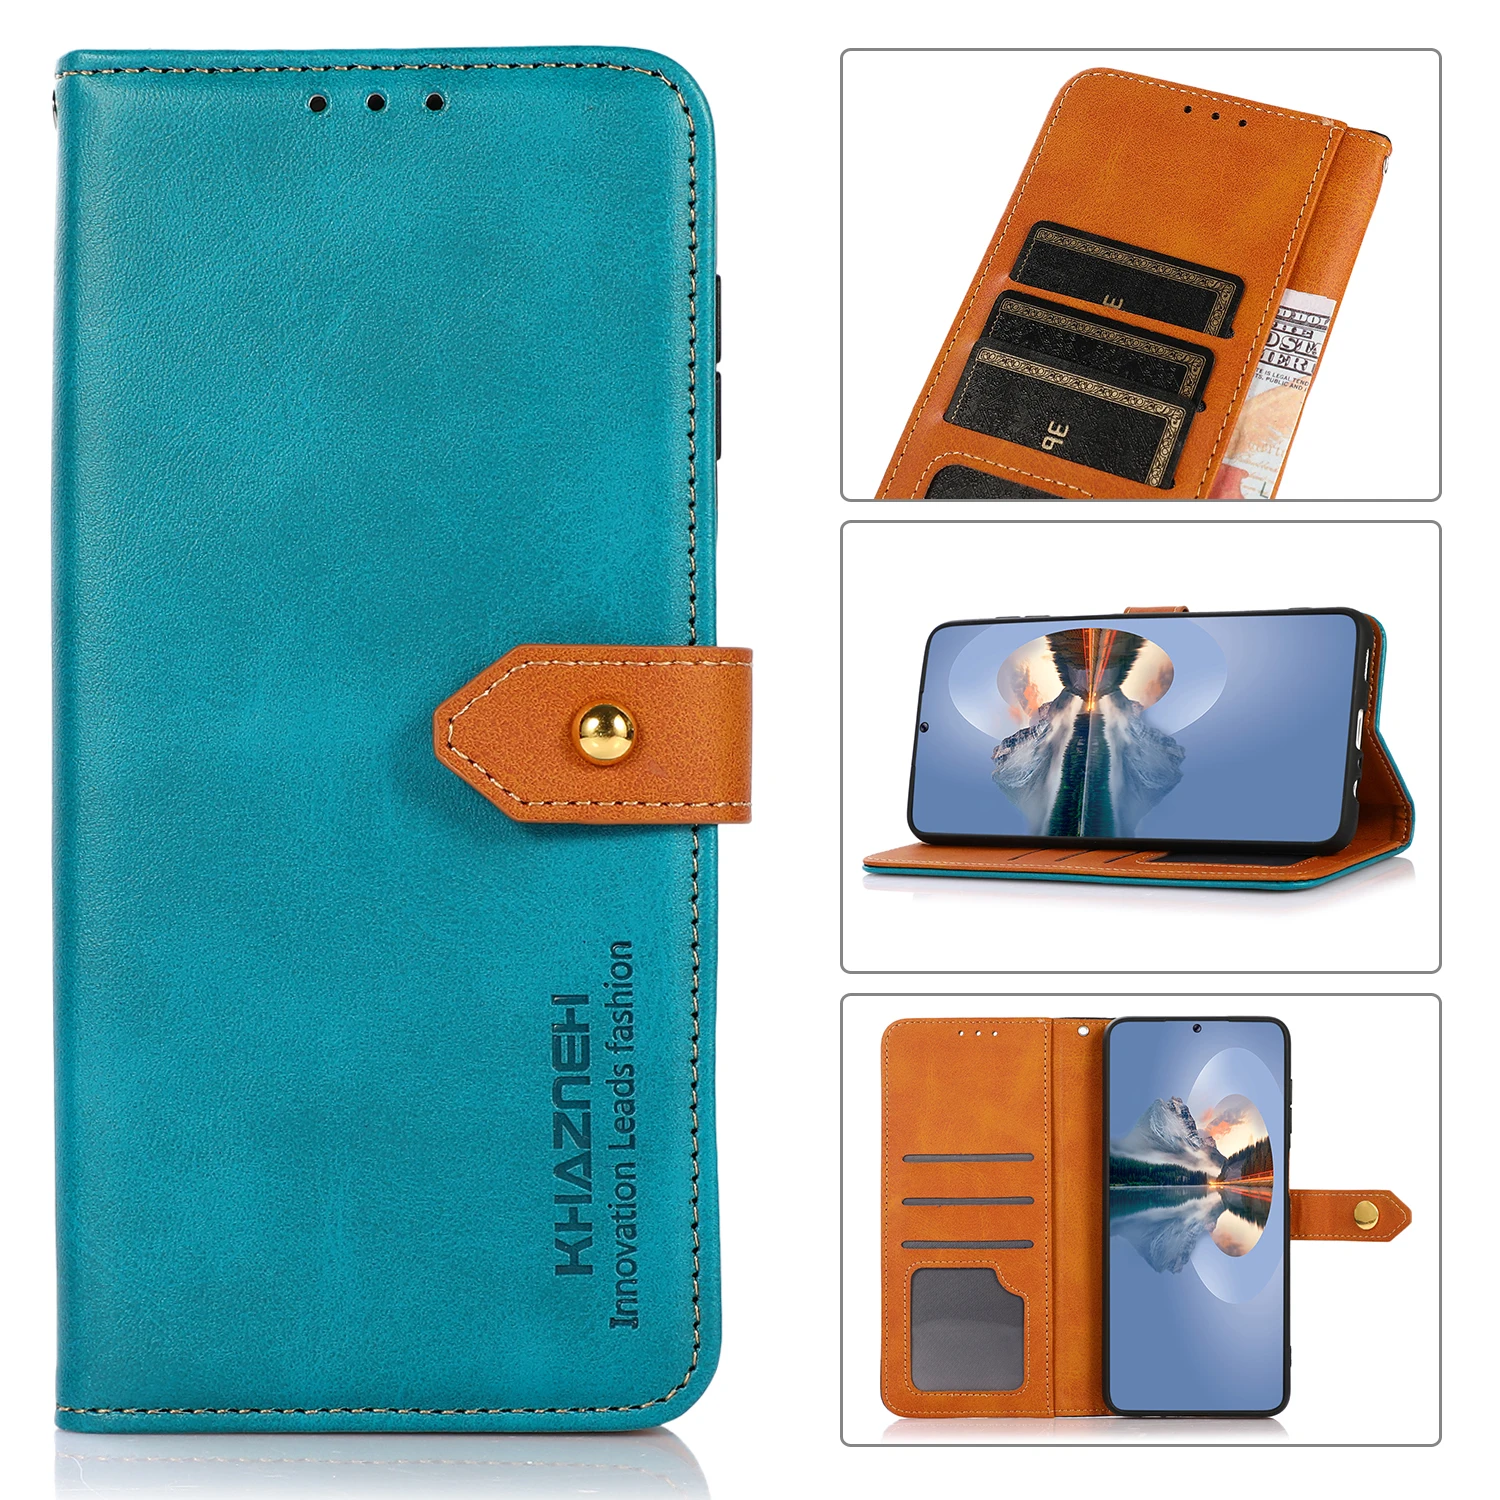 

Gold button two color cattle pattern PU Leather Flip Wallet Case For WIKO Y82, As pictures